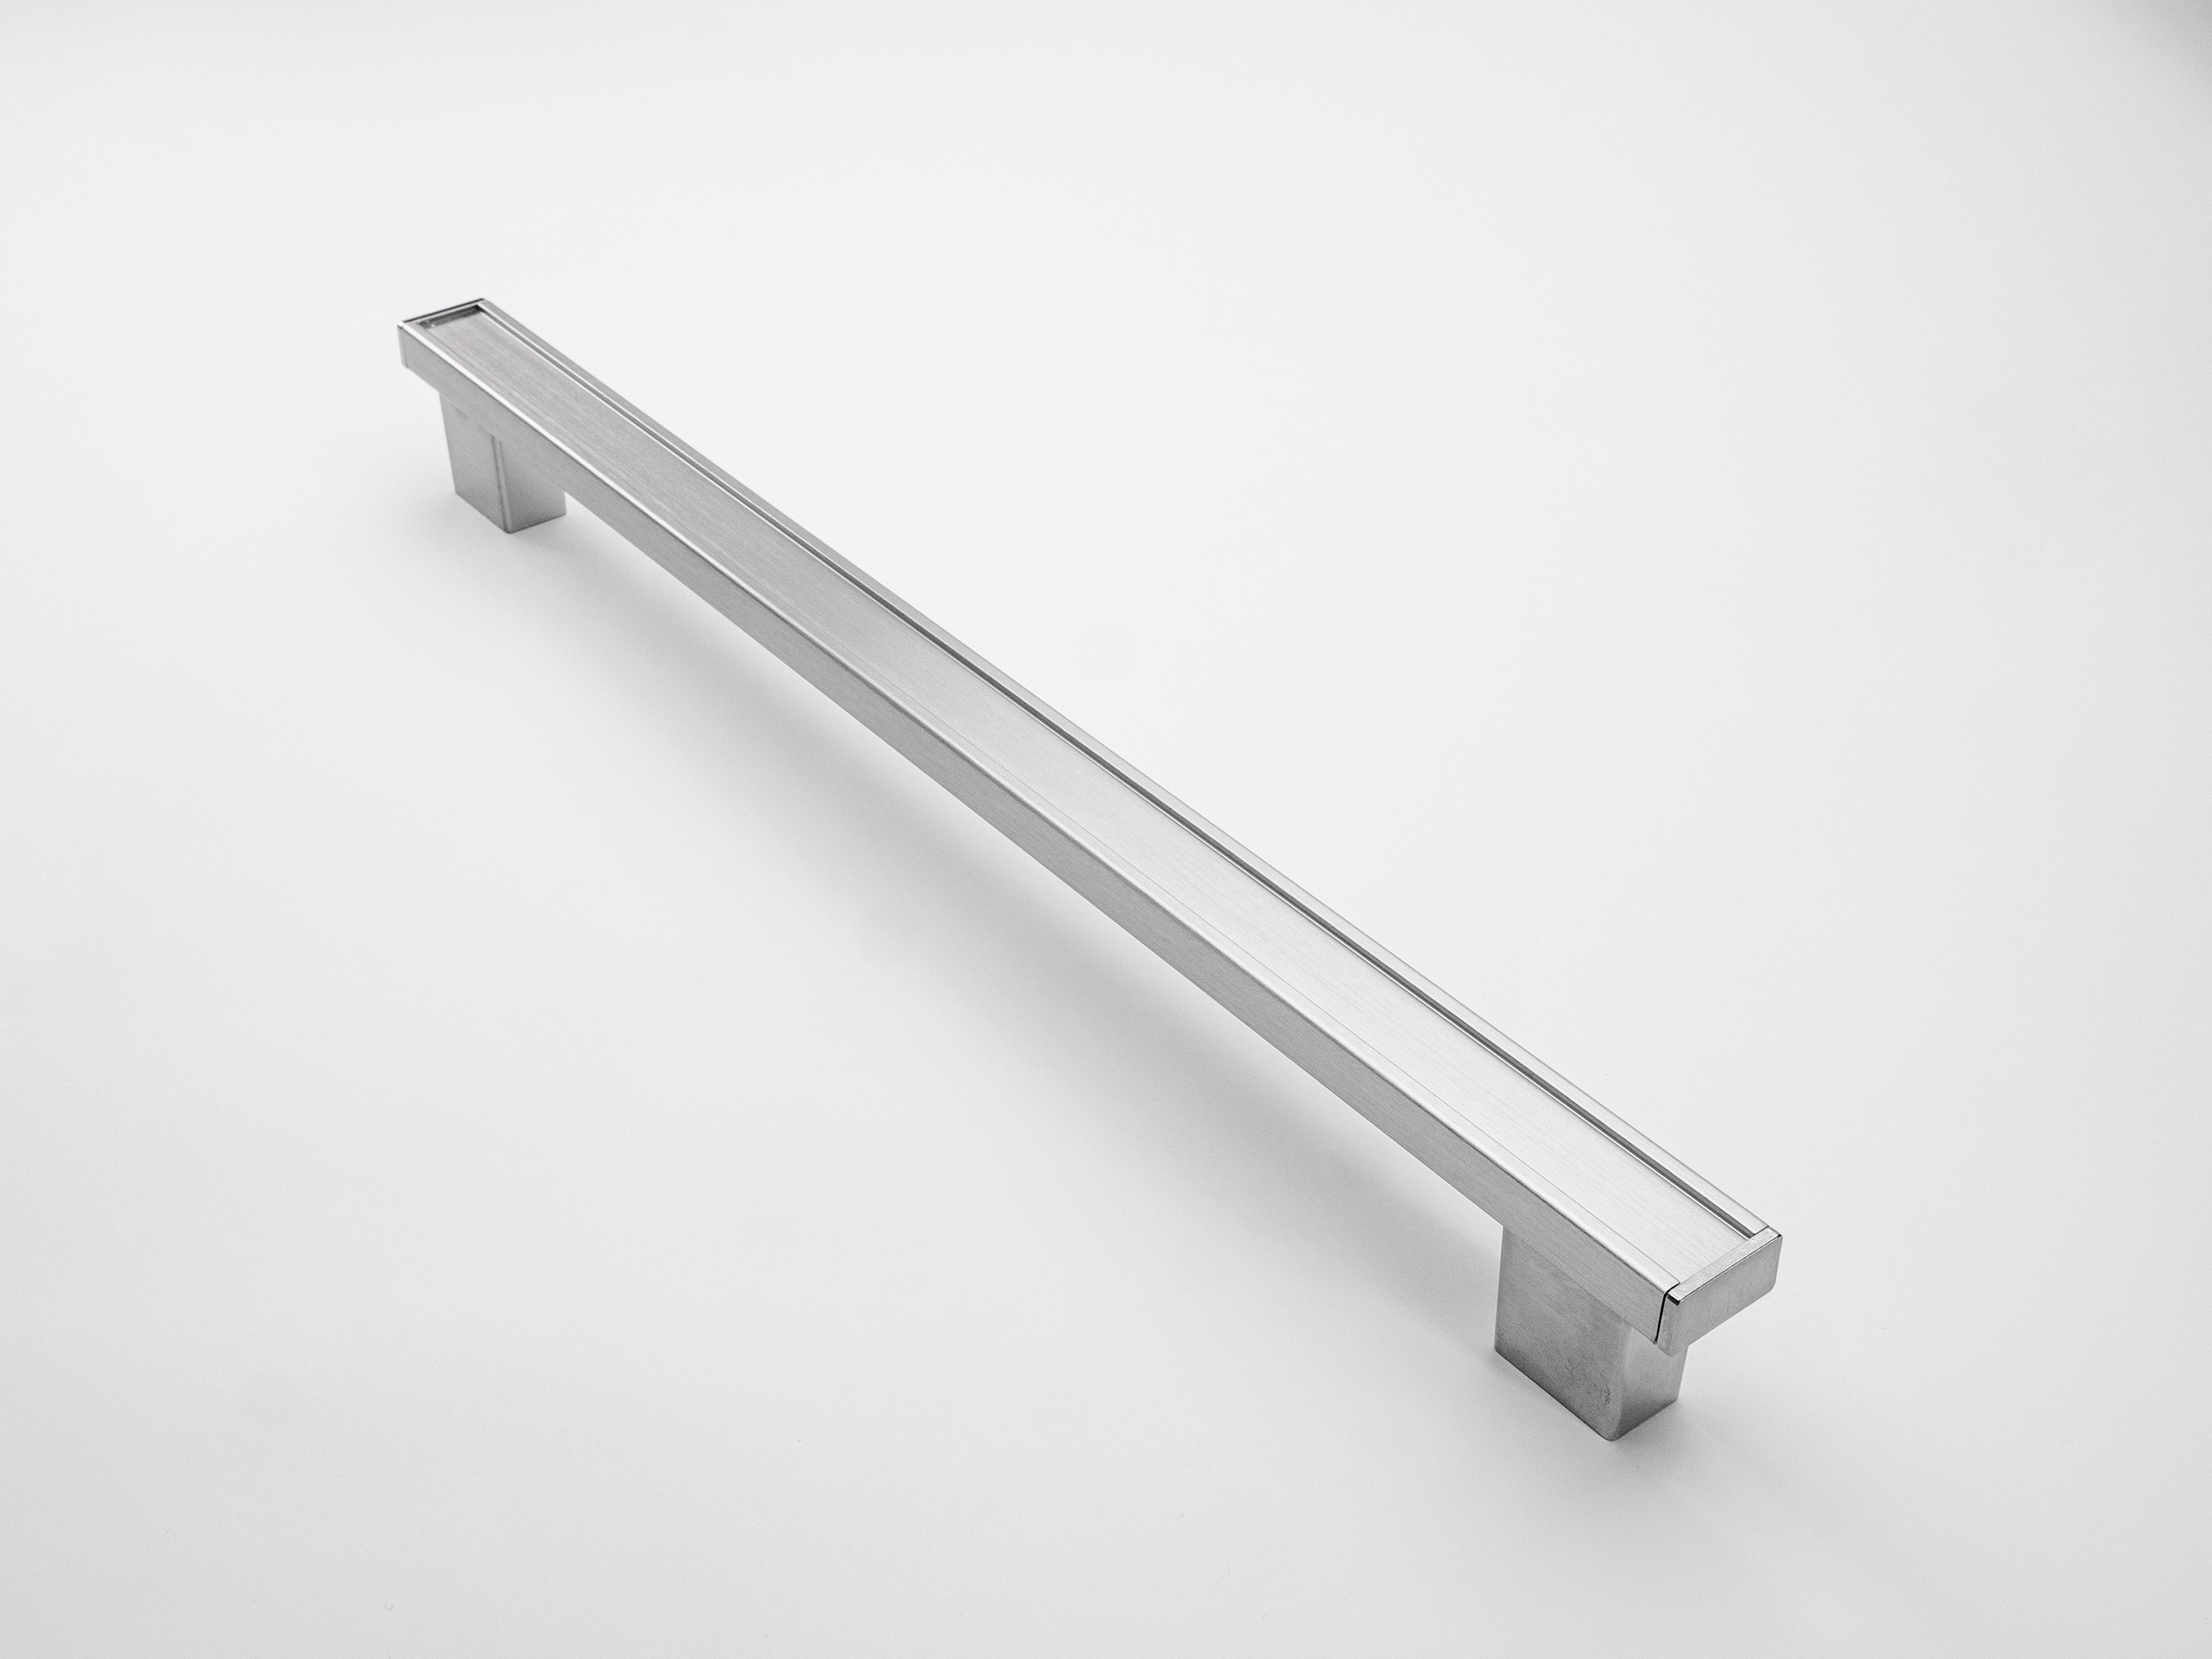 Tubular 3-Piece Oven Handle - with nickel-plated and then brushed thermosetting terminals